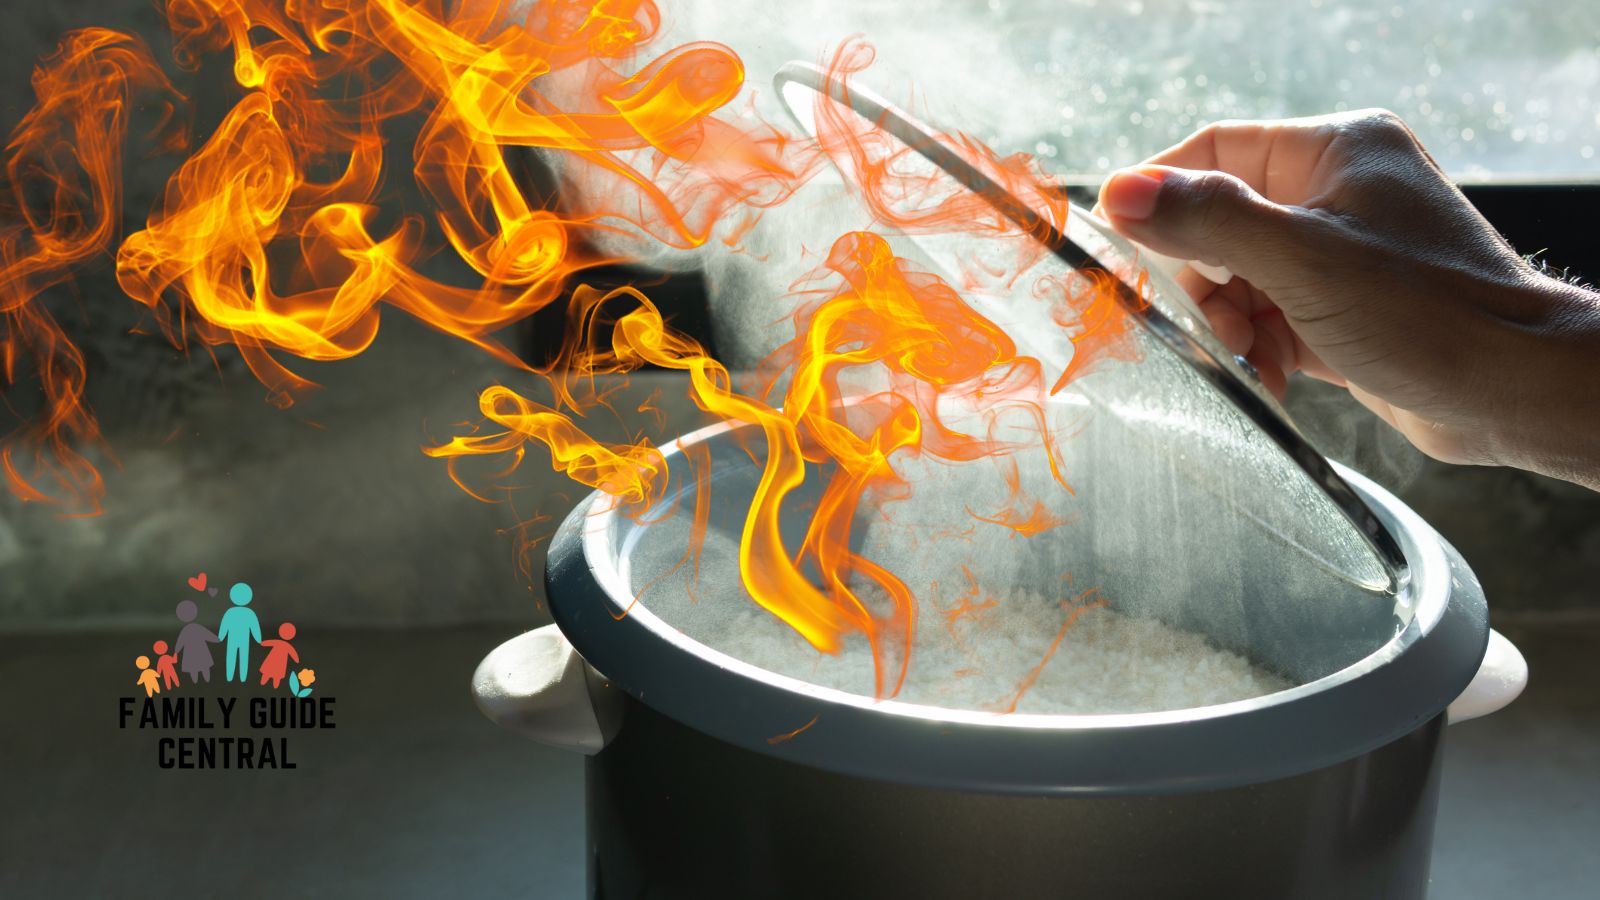 Person opening rice cooker on fire - familyguidecentral.com